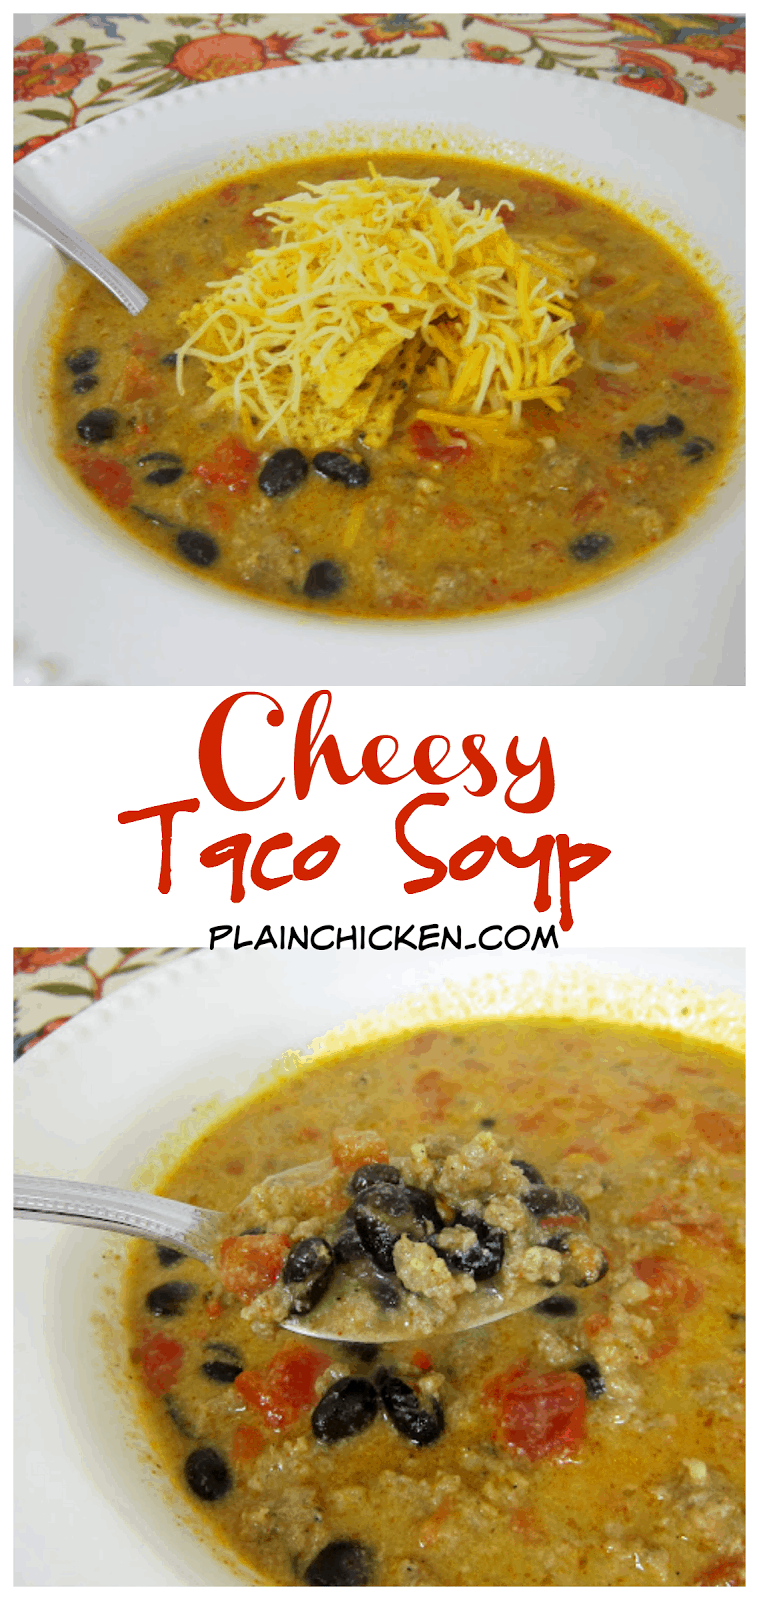 Cheesy Taco Soup - Ready in 30 minutes! Sausage/Hamburger, onion, garlic, chili powder, cumin, chicken broth, black beans, Rotel, Rotel, milk - It is hard to beat this quick soup! Reduce the calories/fat by using ground turkey. We eat this at least once a month!